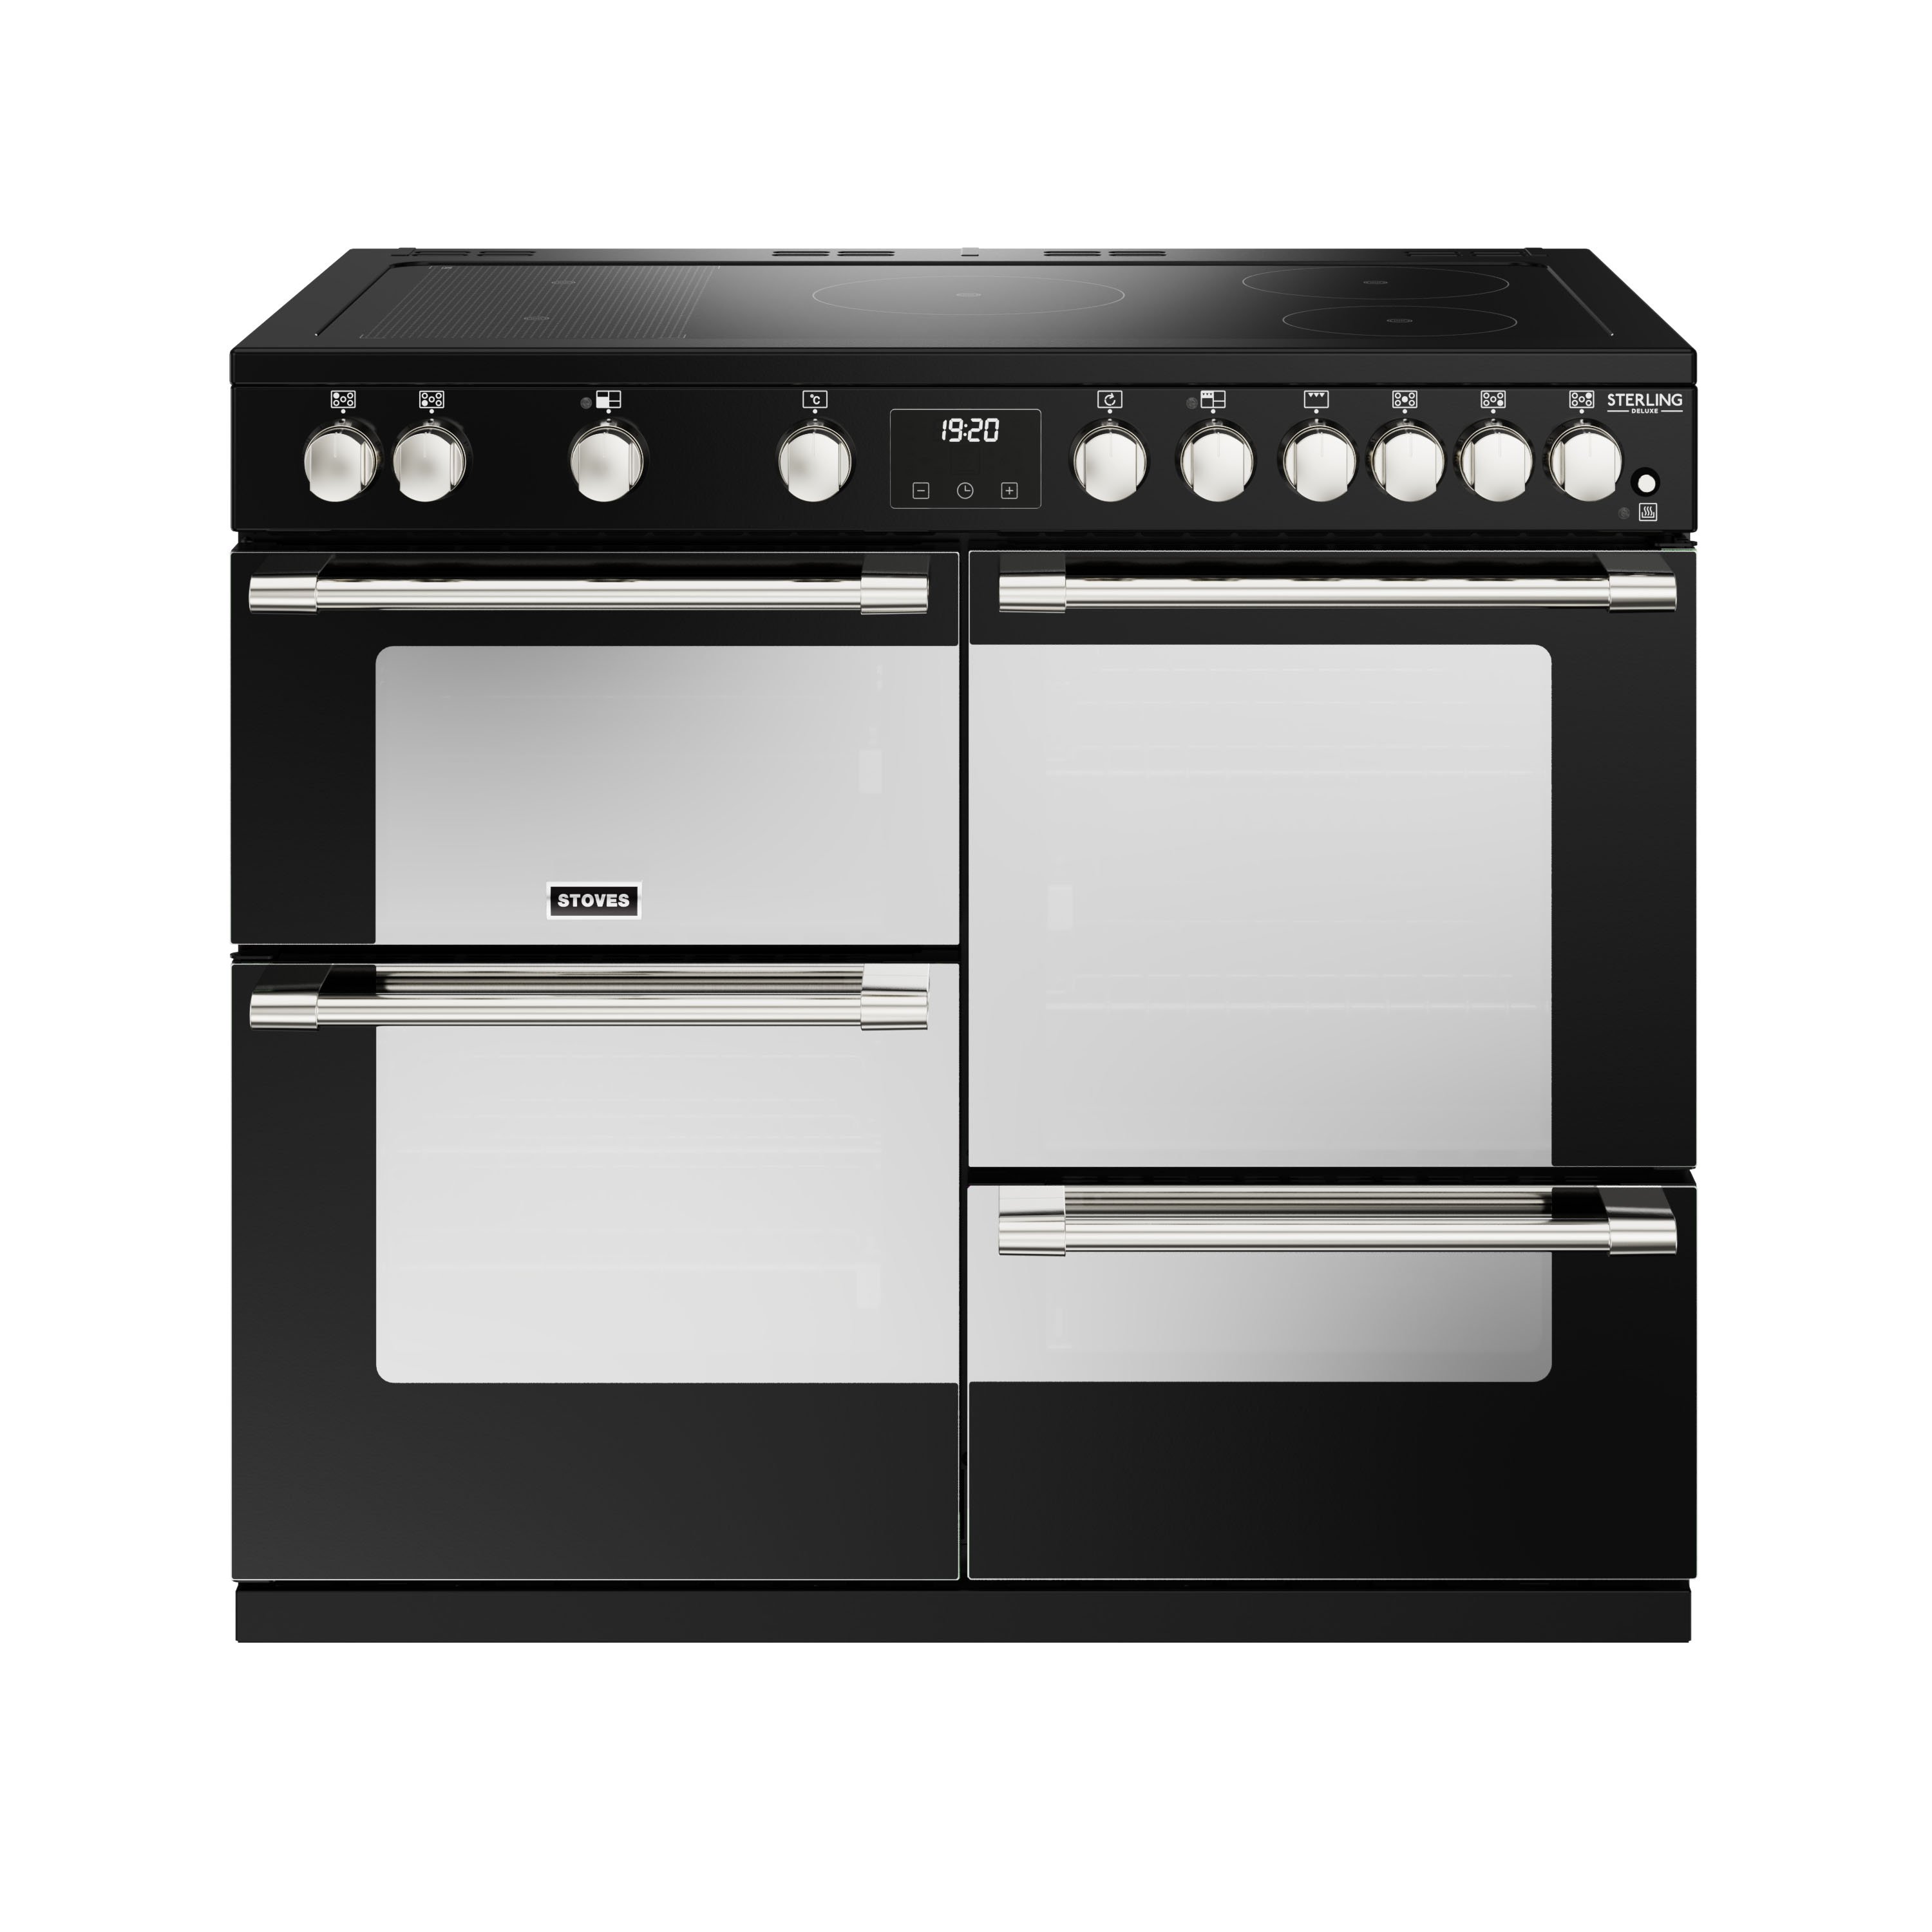 100cm electric induction range cooker with a 5 zone rotary control hob, conventional oven & grill, multifunction main oven with TrueTemp digital thermostat, fanned second oven and dedicated slow cook oven